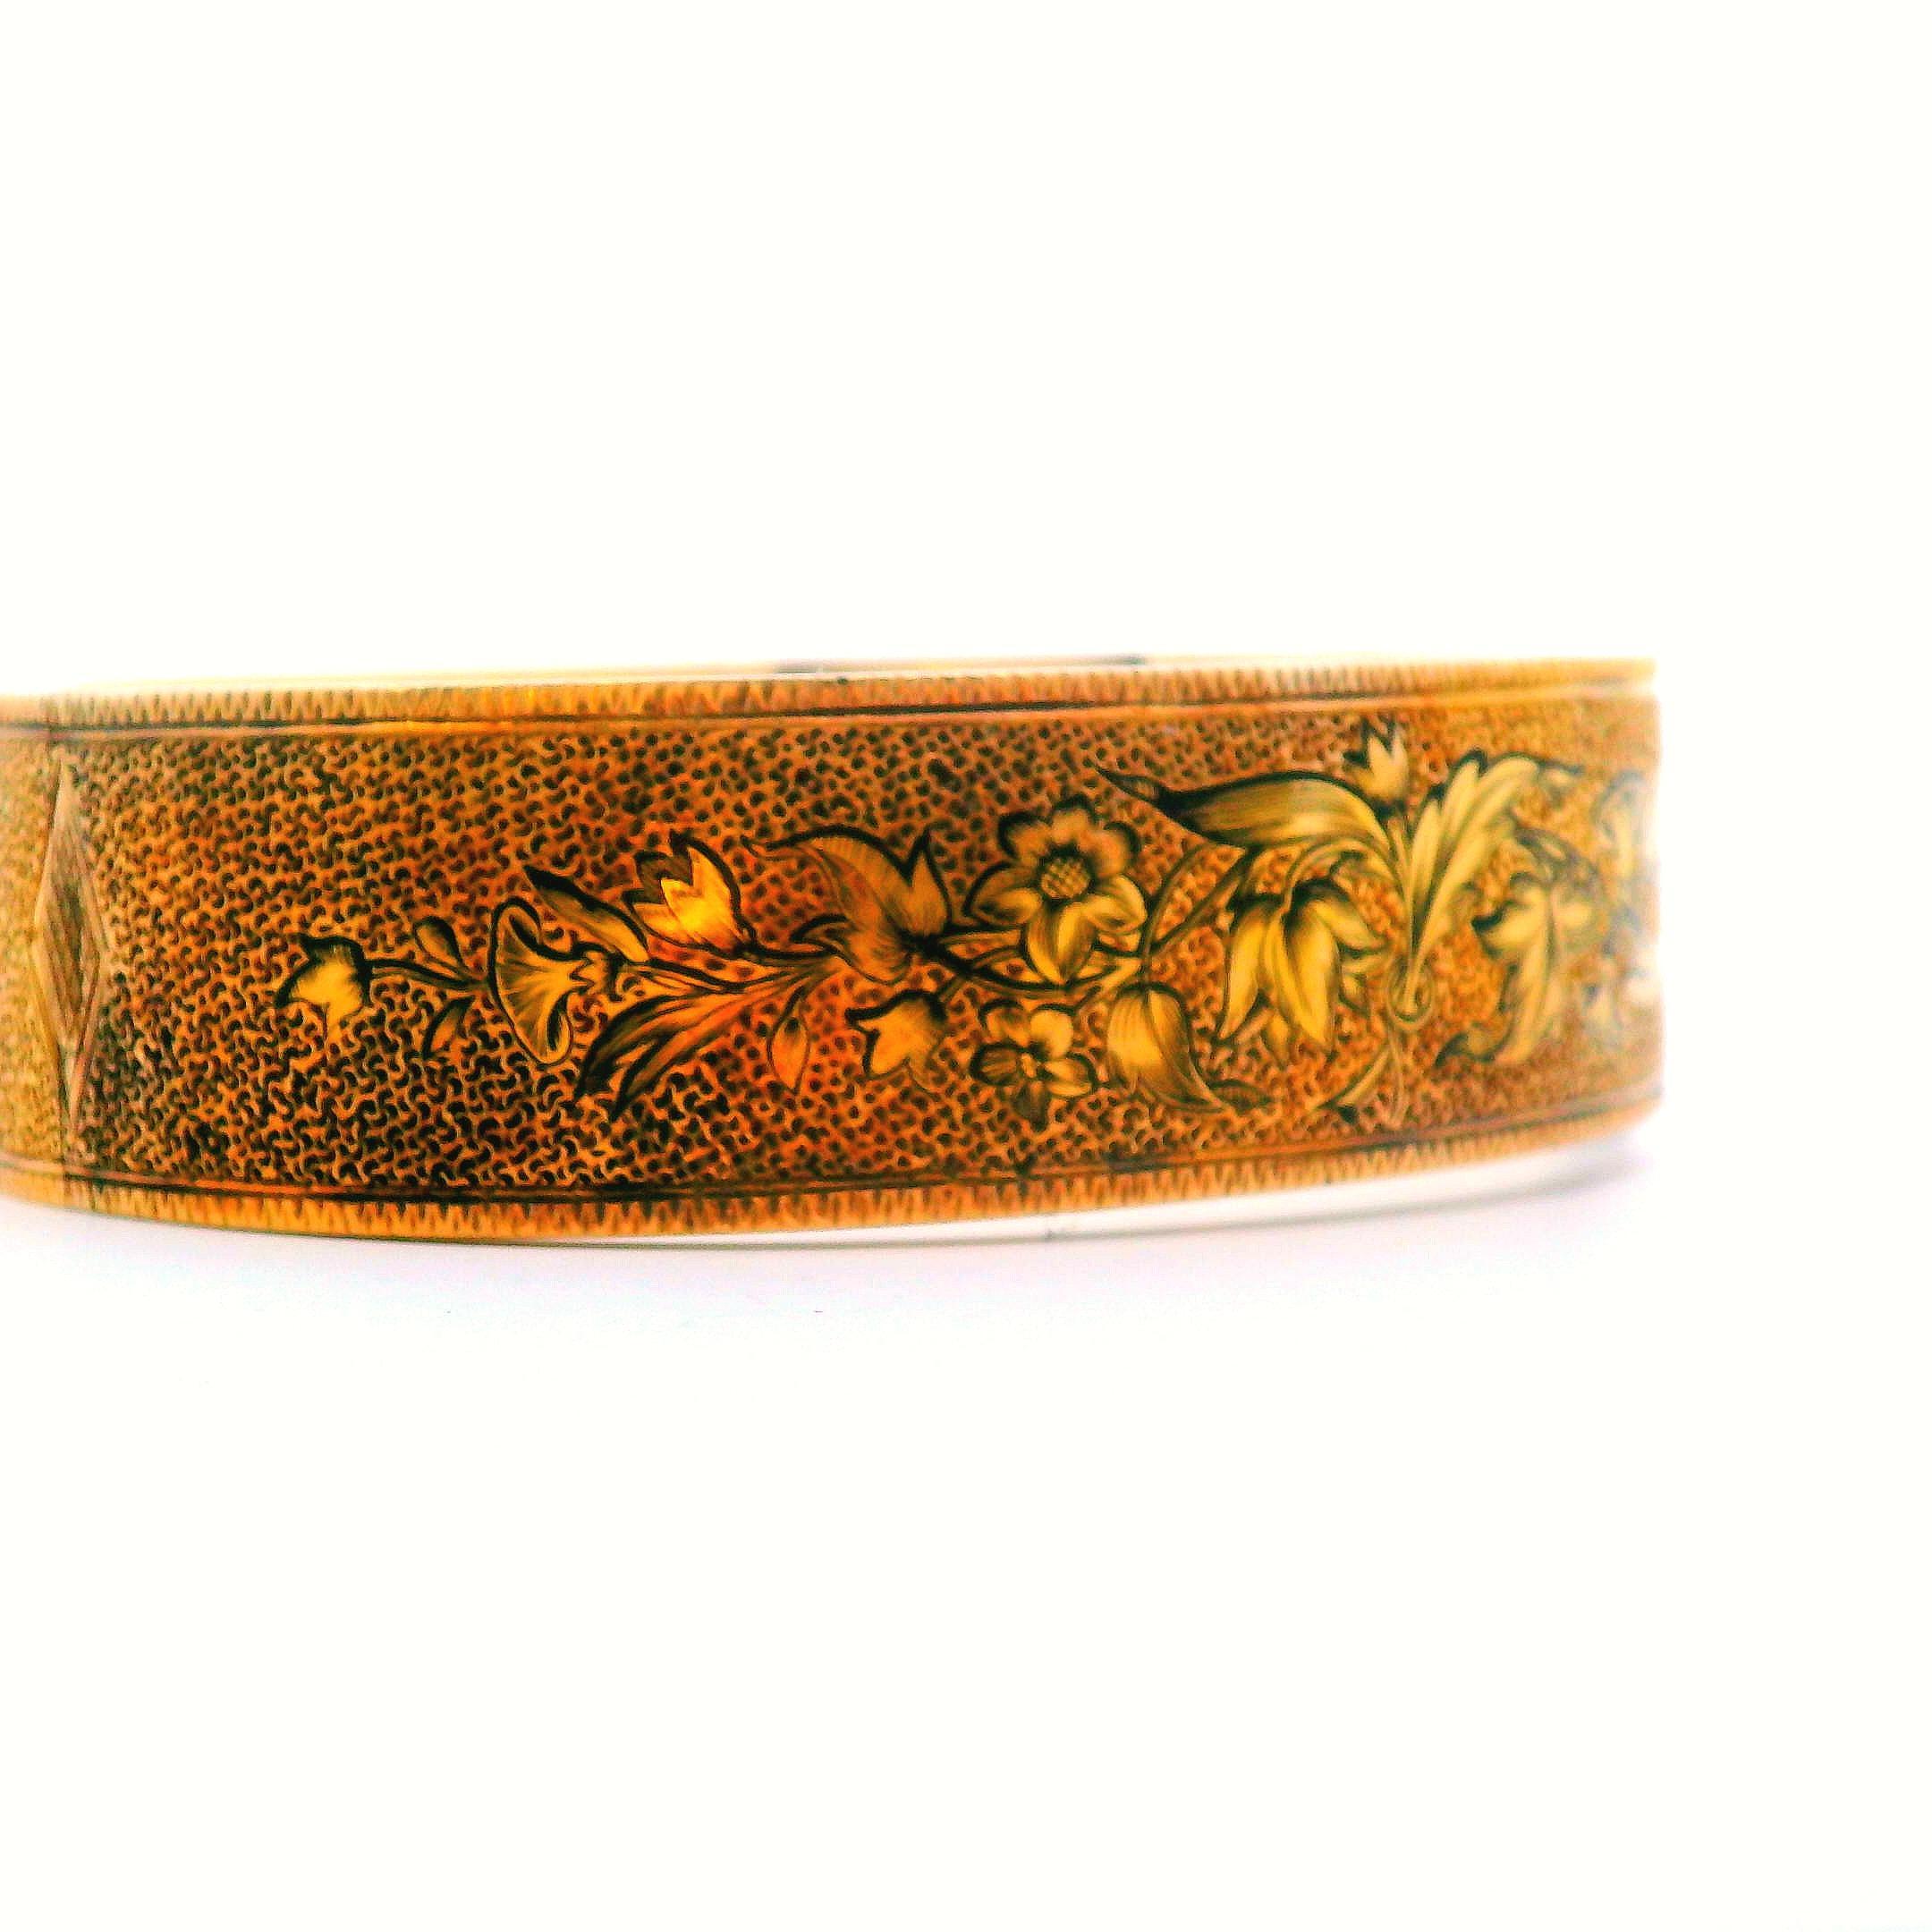 This beautiful Victorian bracelet from the 1880s is enameled with a beautiful floral pattern and is made in 14k yellow gold. Being made in 14k yellow gold, this bracelet is made with precious materials and fine craftsmanship that ensure this